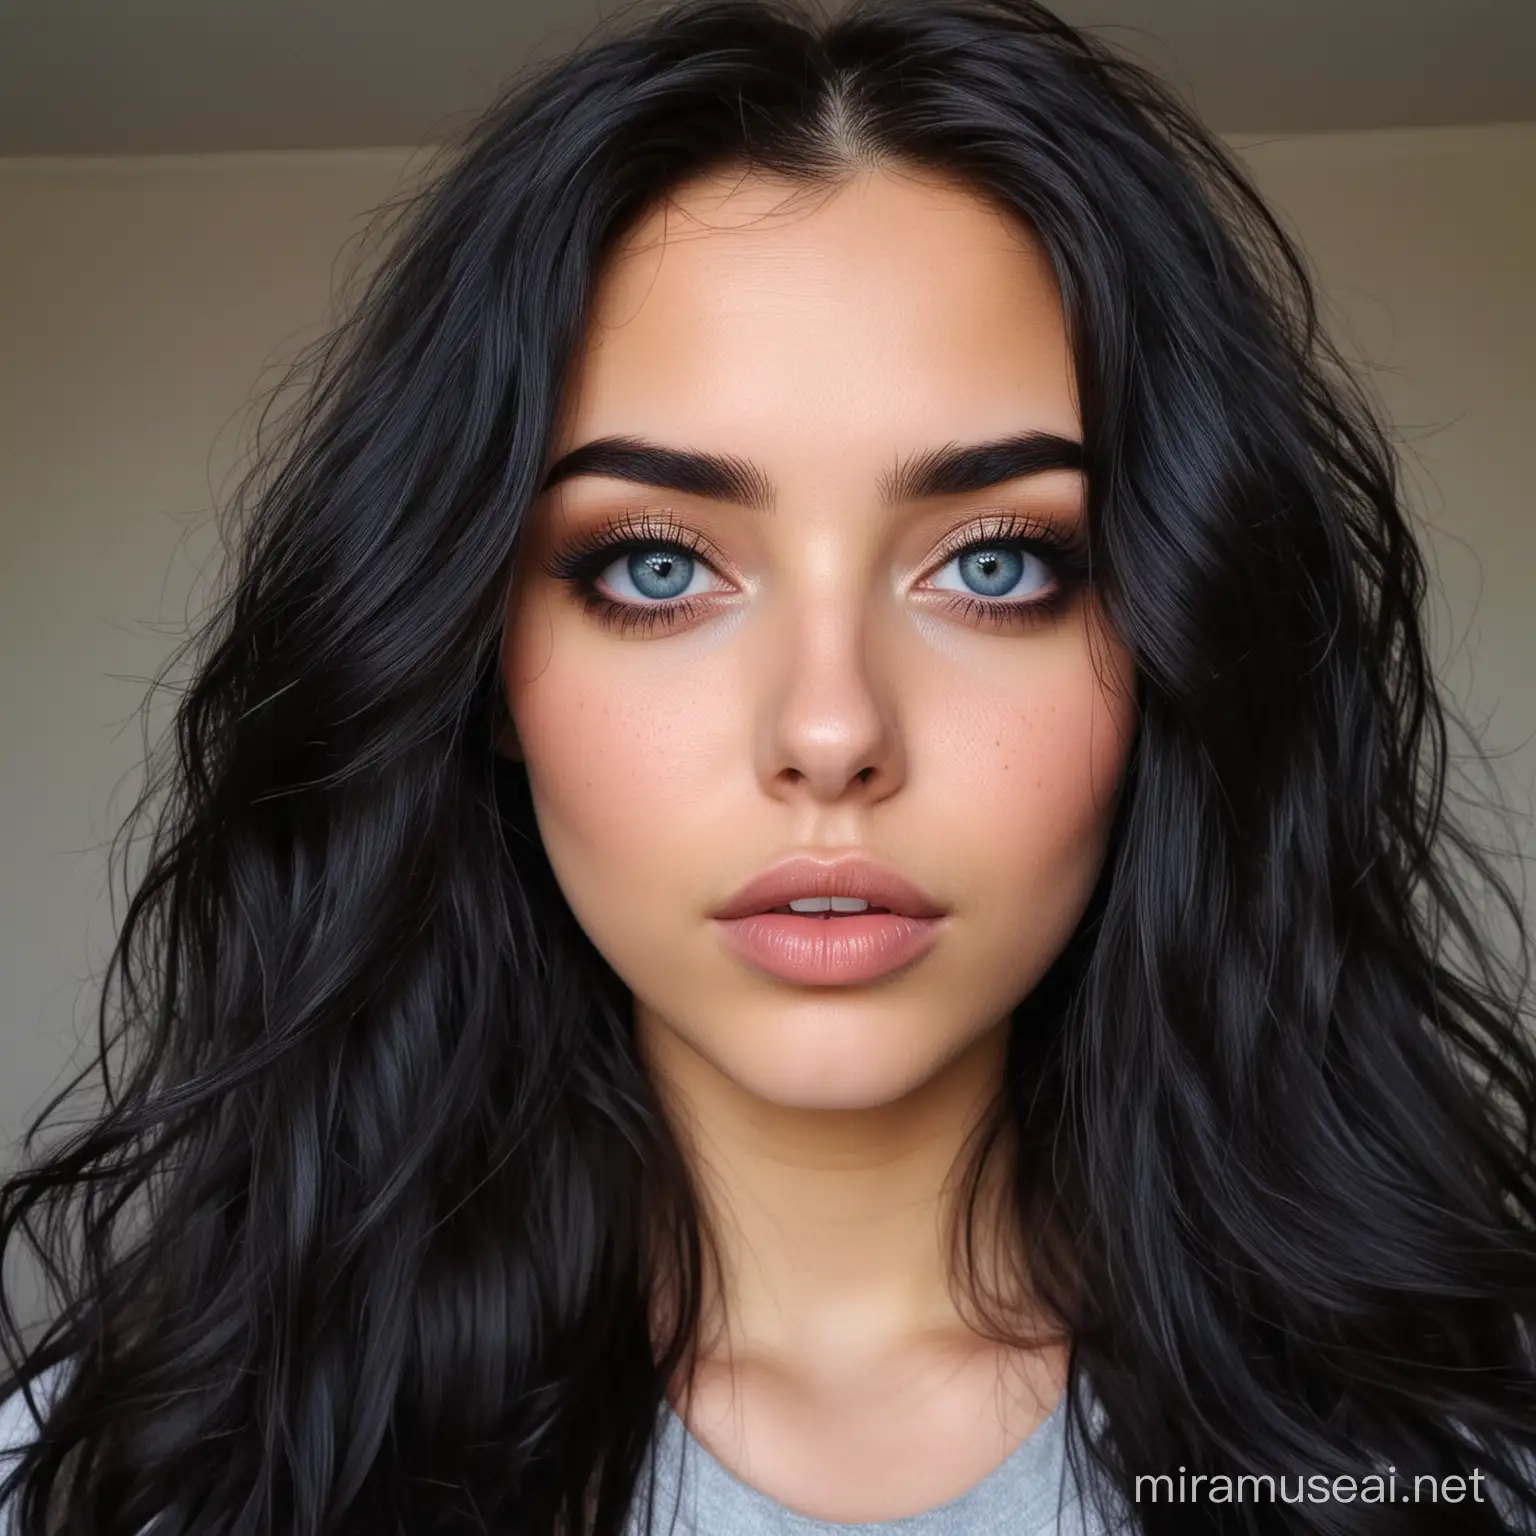 A girl with a round face, deep blue eye color,  snub nose, straight, thick black eyebrows, full lips and long black wavy hair, with no make up